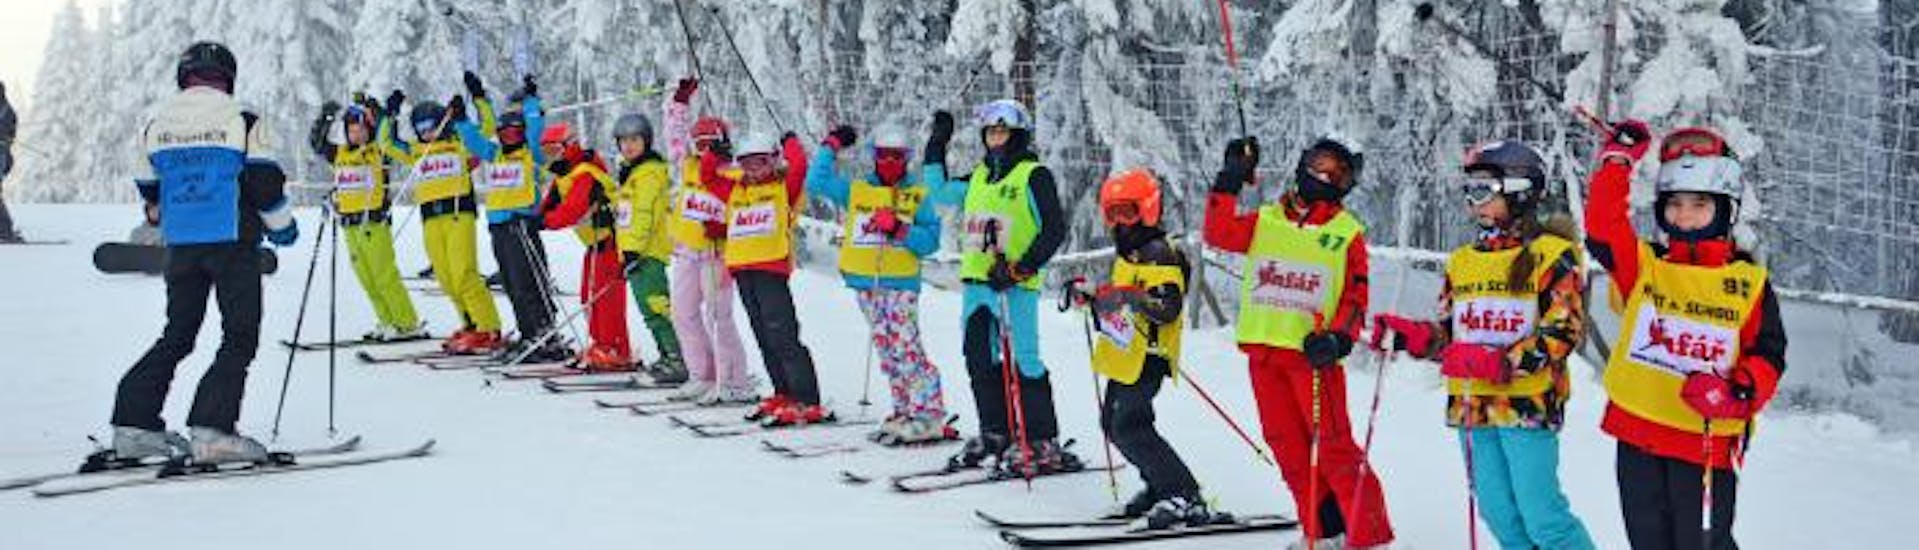 Kids Ski Lessons (from 5 y.) for All Levels - Small Group.